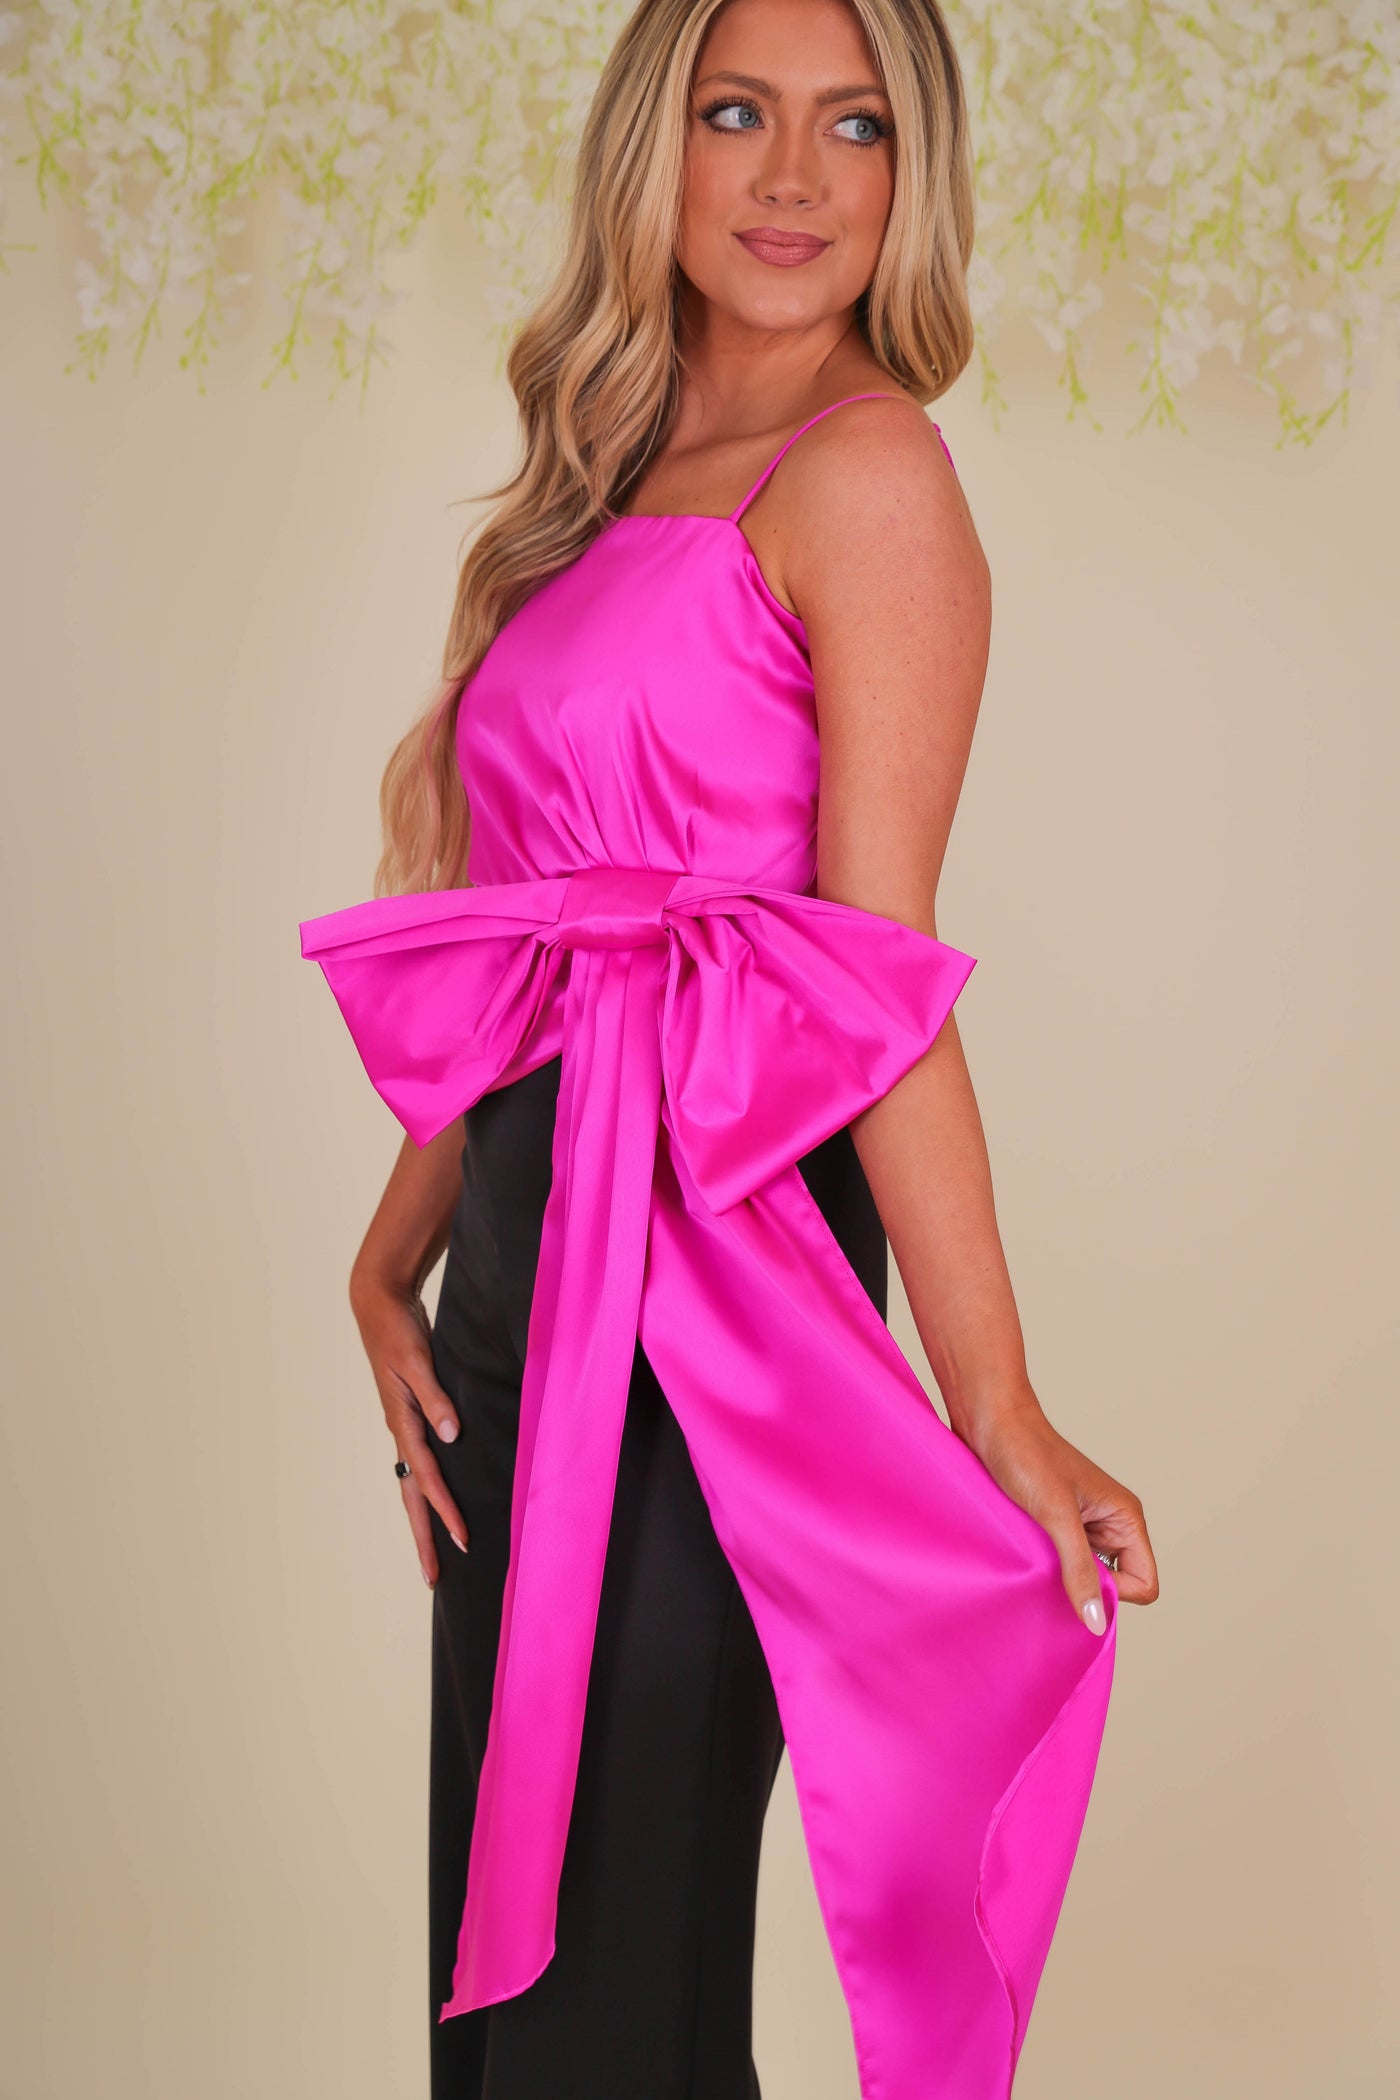 Women's Pink Satin Top- Women's Pink Bow Top- GLAM Satin Bow Top